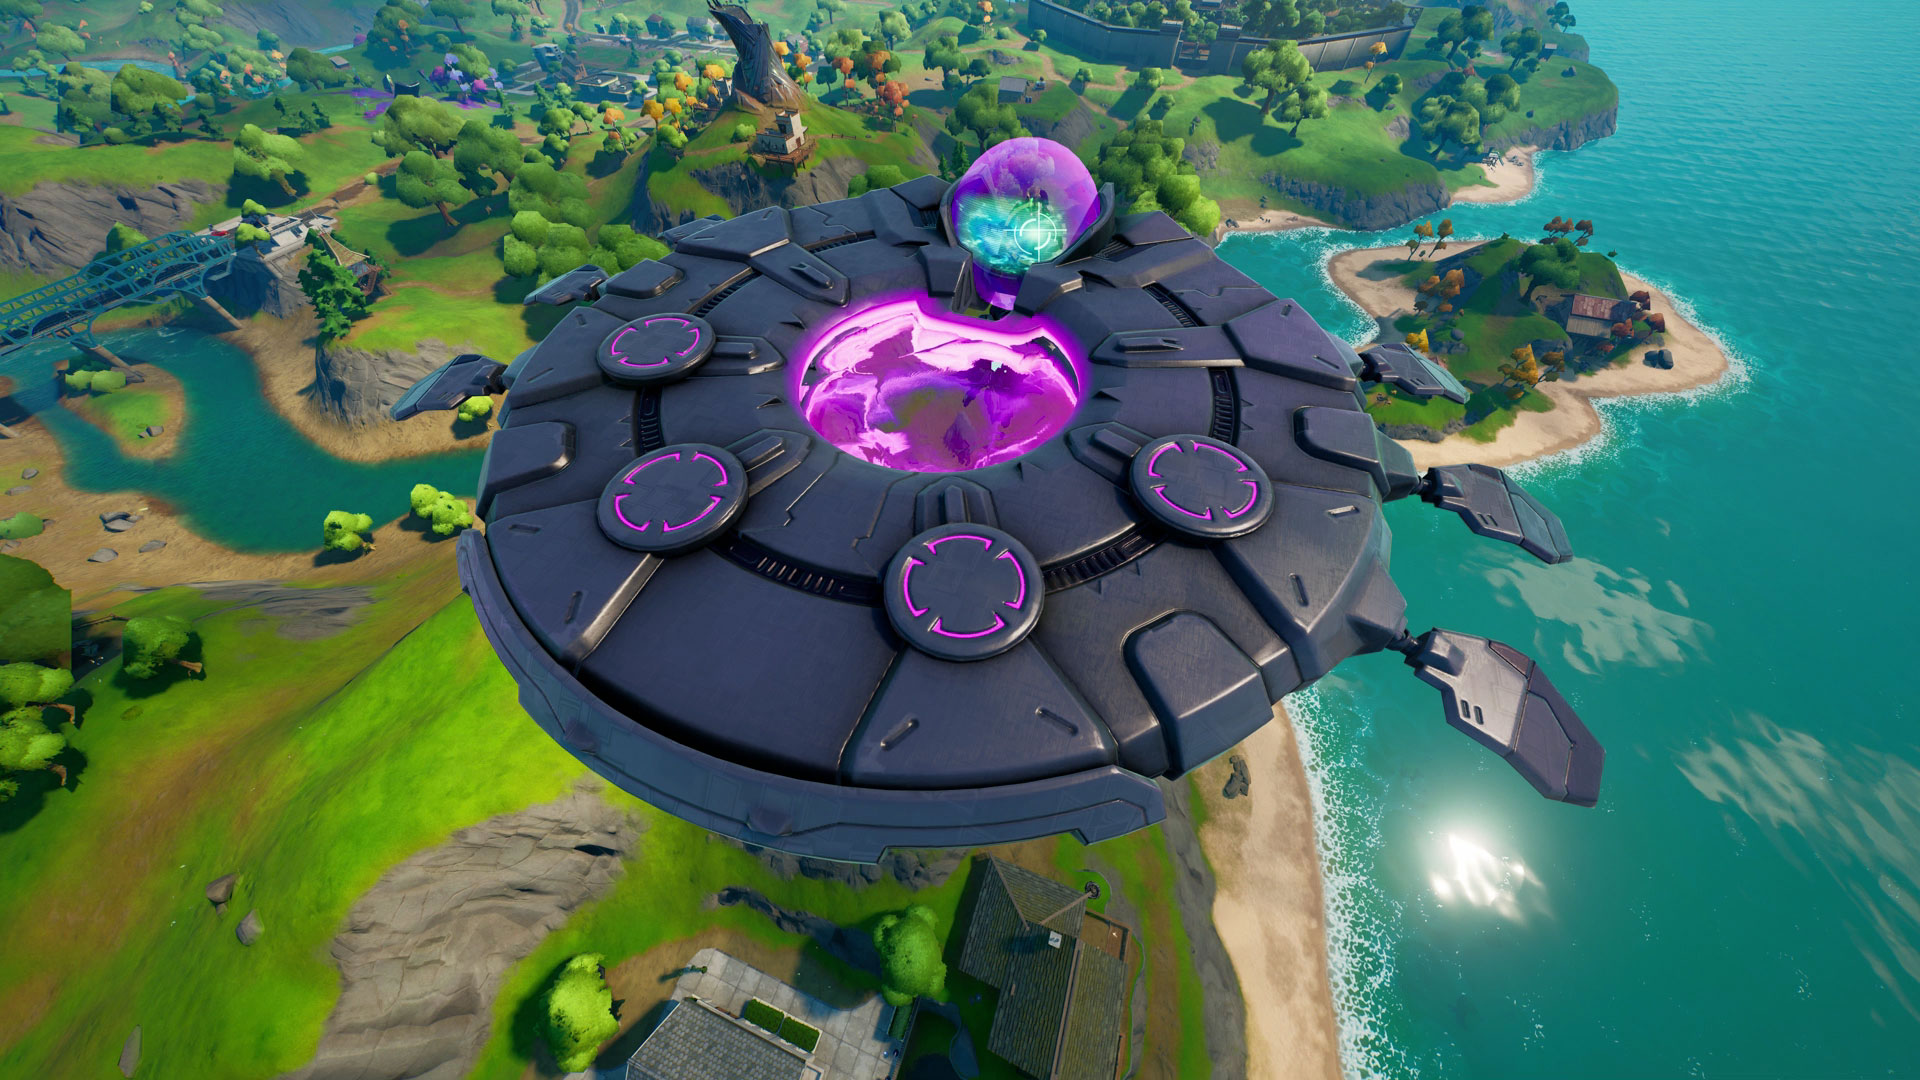 What Location Is This In Fortnite Fortnite Ufos Locations How To Enter A Fortnite Saucer Gamesradar